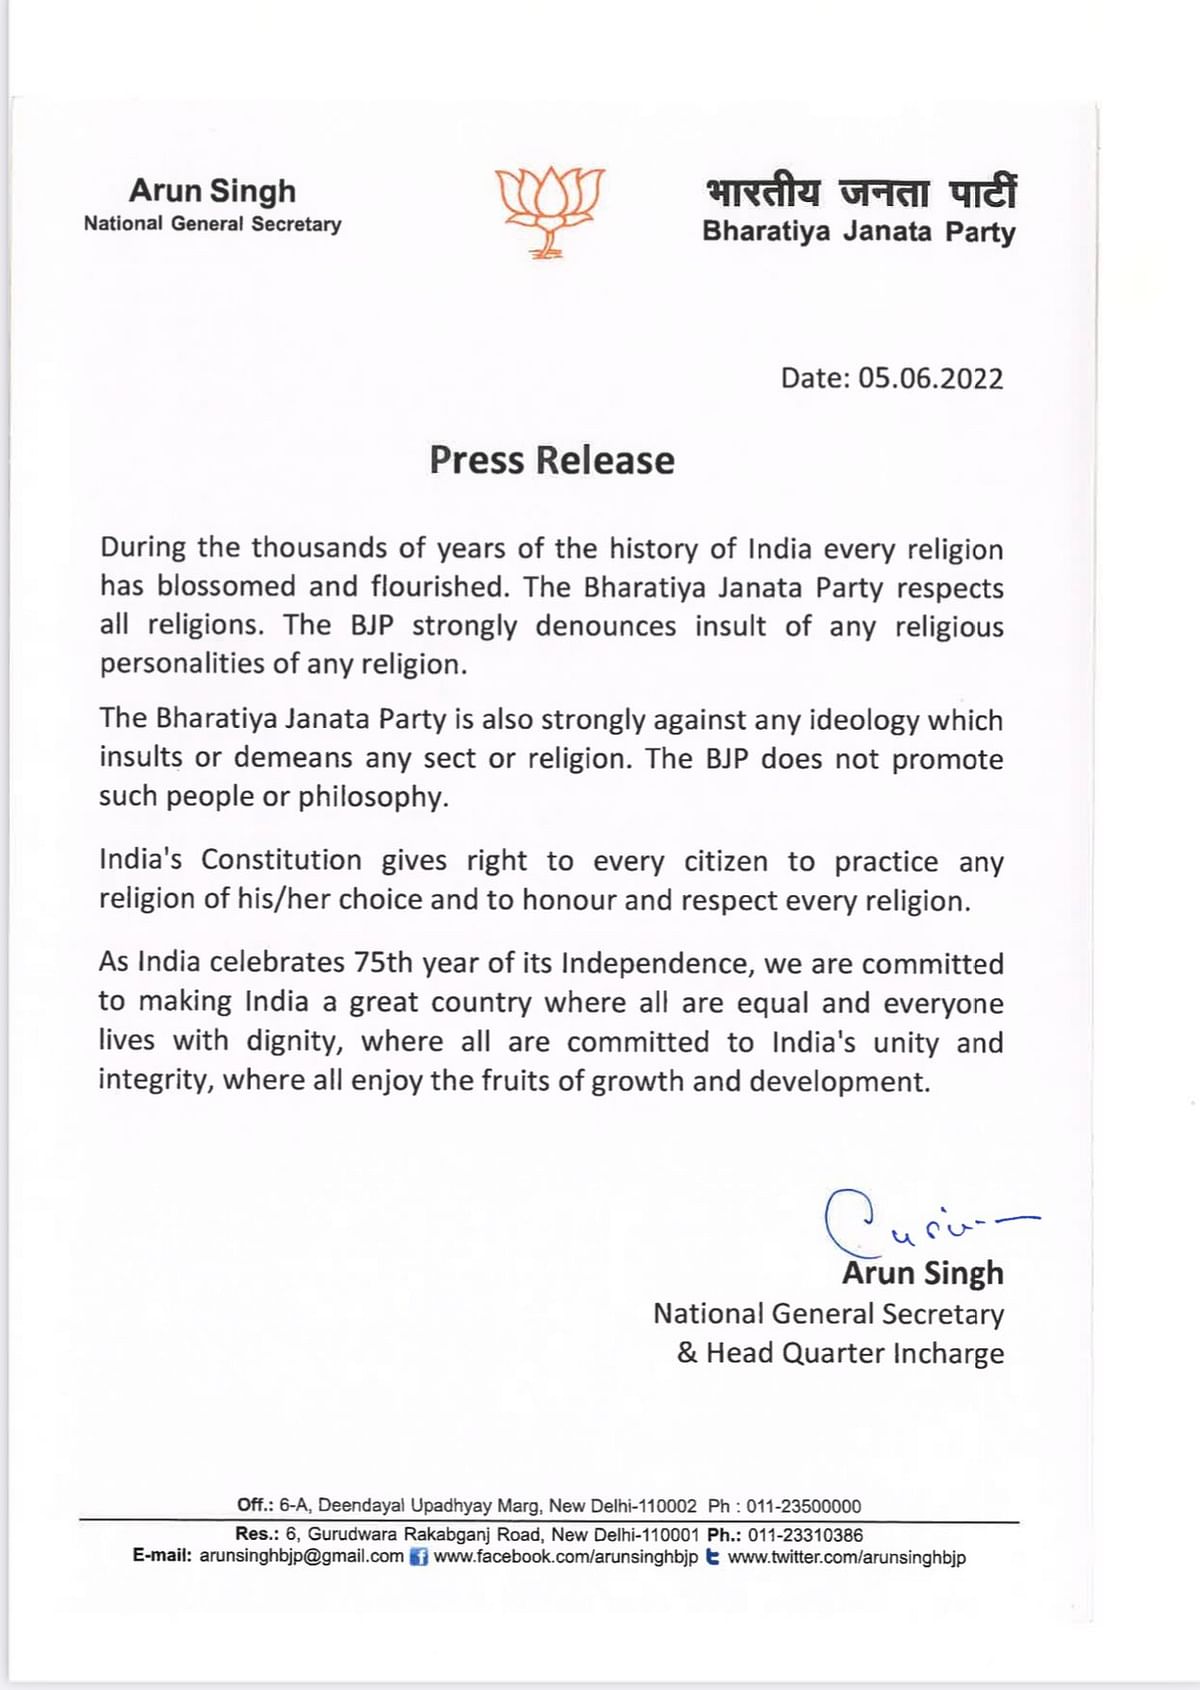 The BJP statement, however, made no direct mention of any incident or comment.